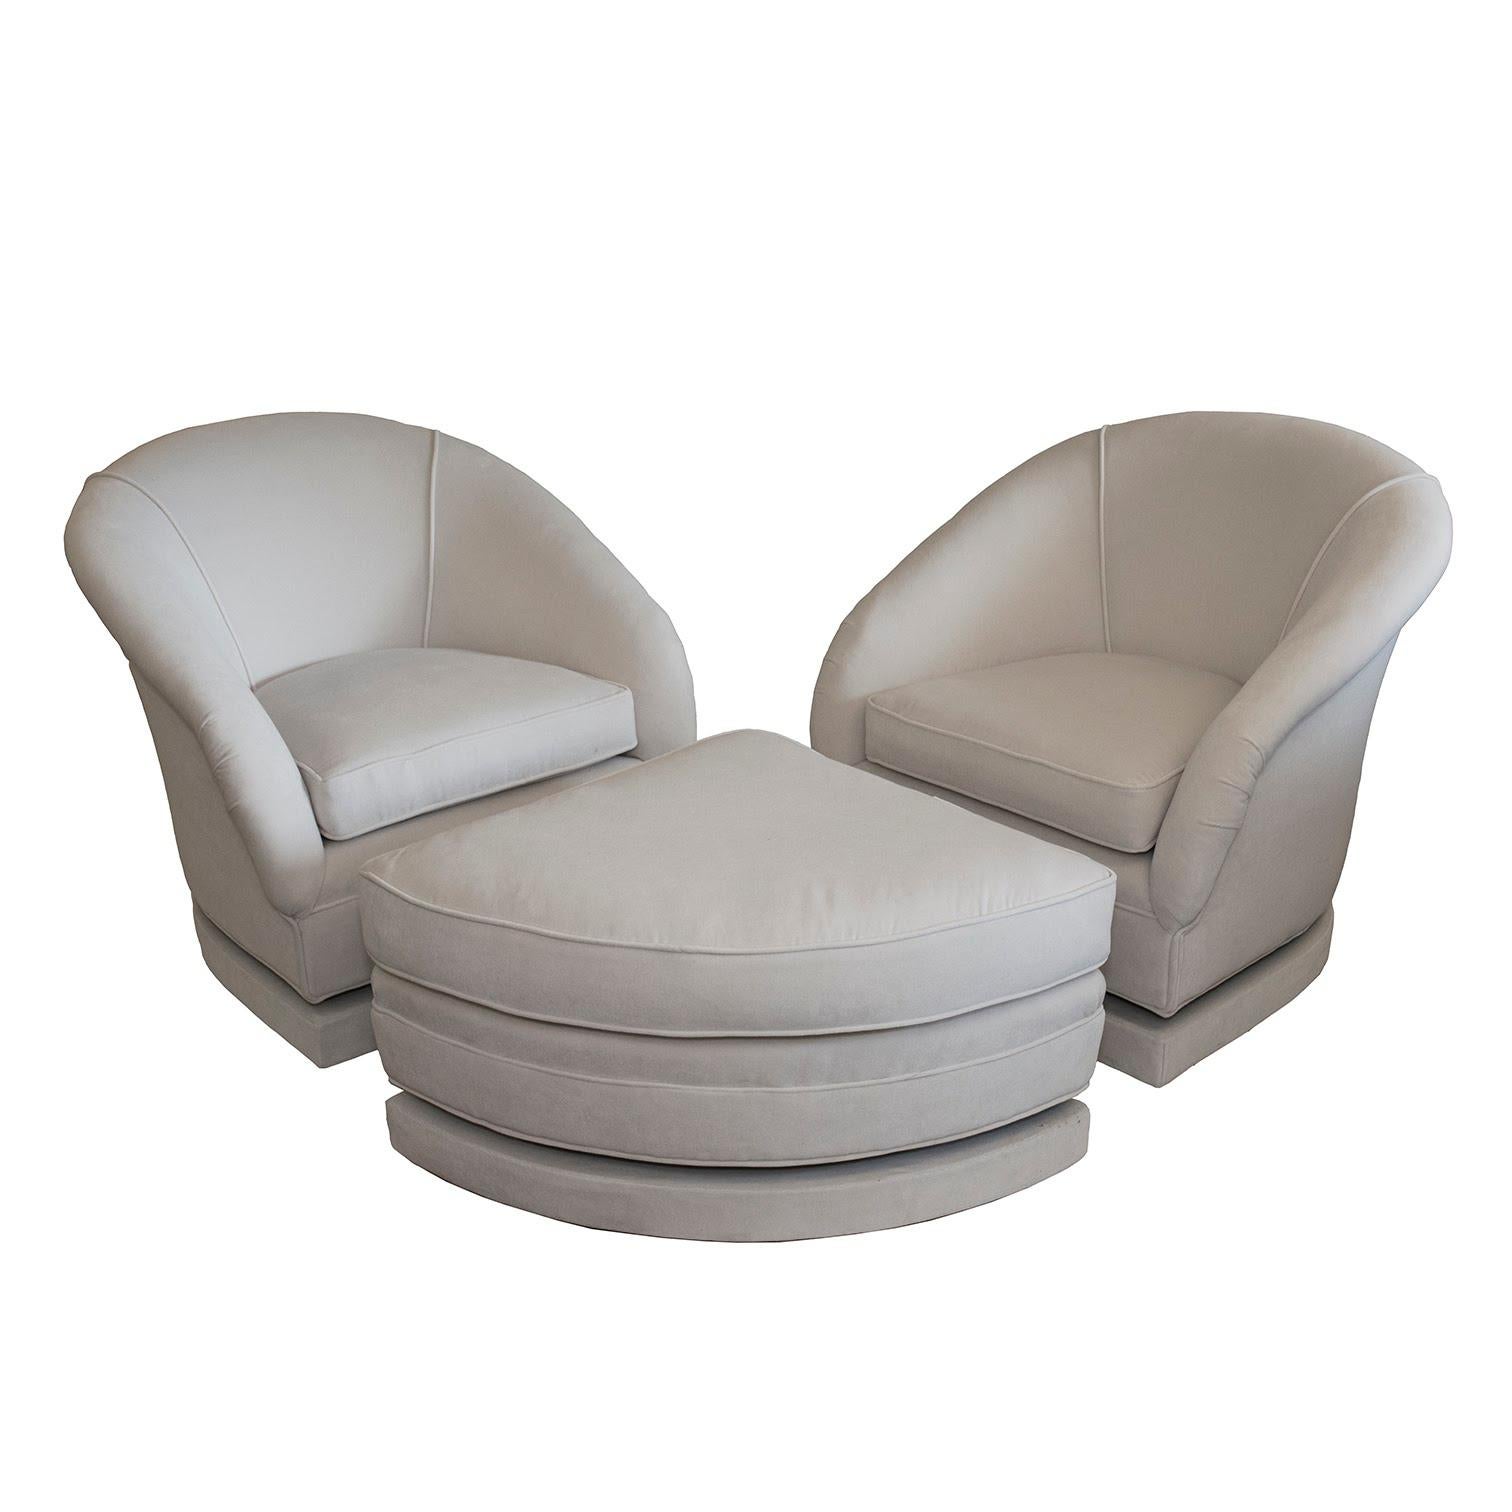 Bespoke Set of Swivel Chairs with Custom Ottoman For Sale